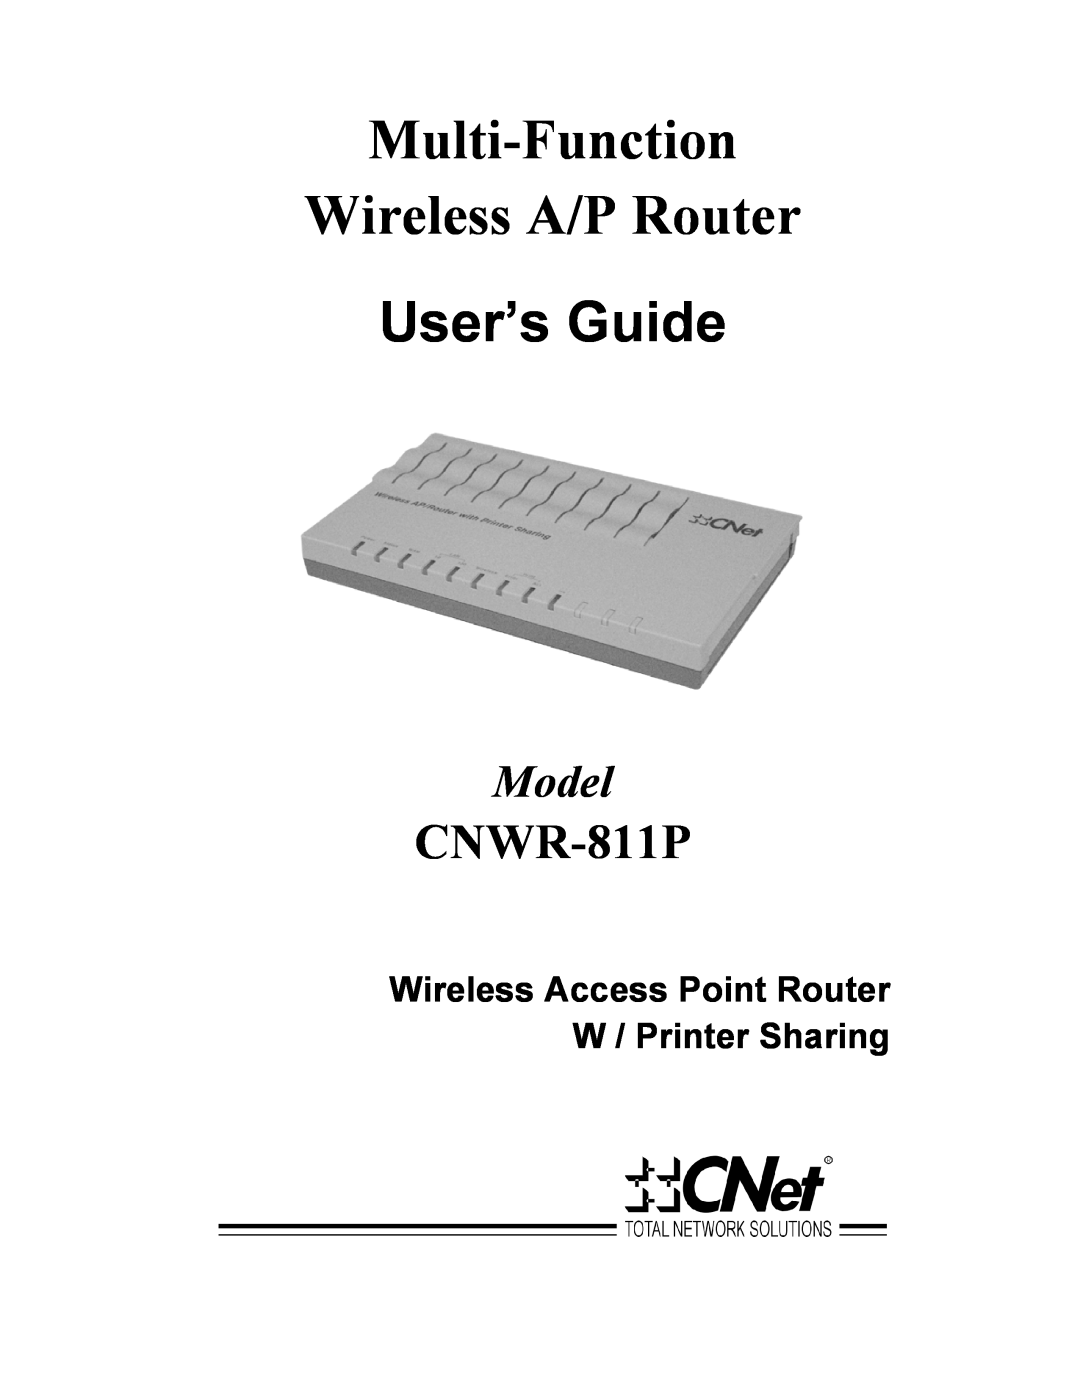 CNET CNWR-811P manual Multi-Function Wireless A/P Router, User’s Guide, Model 